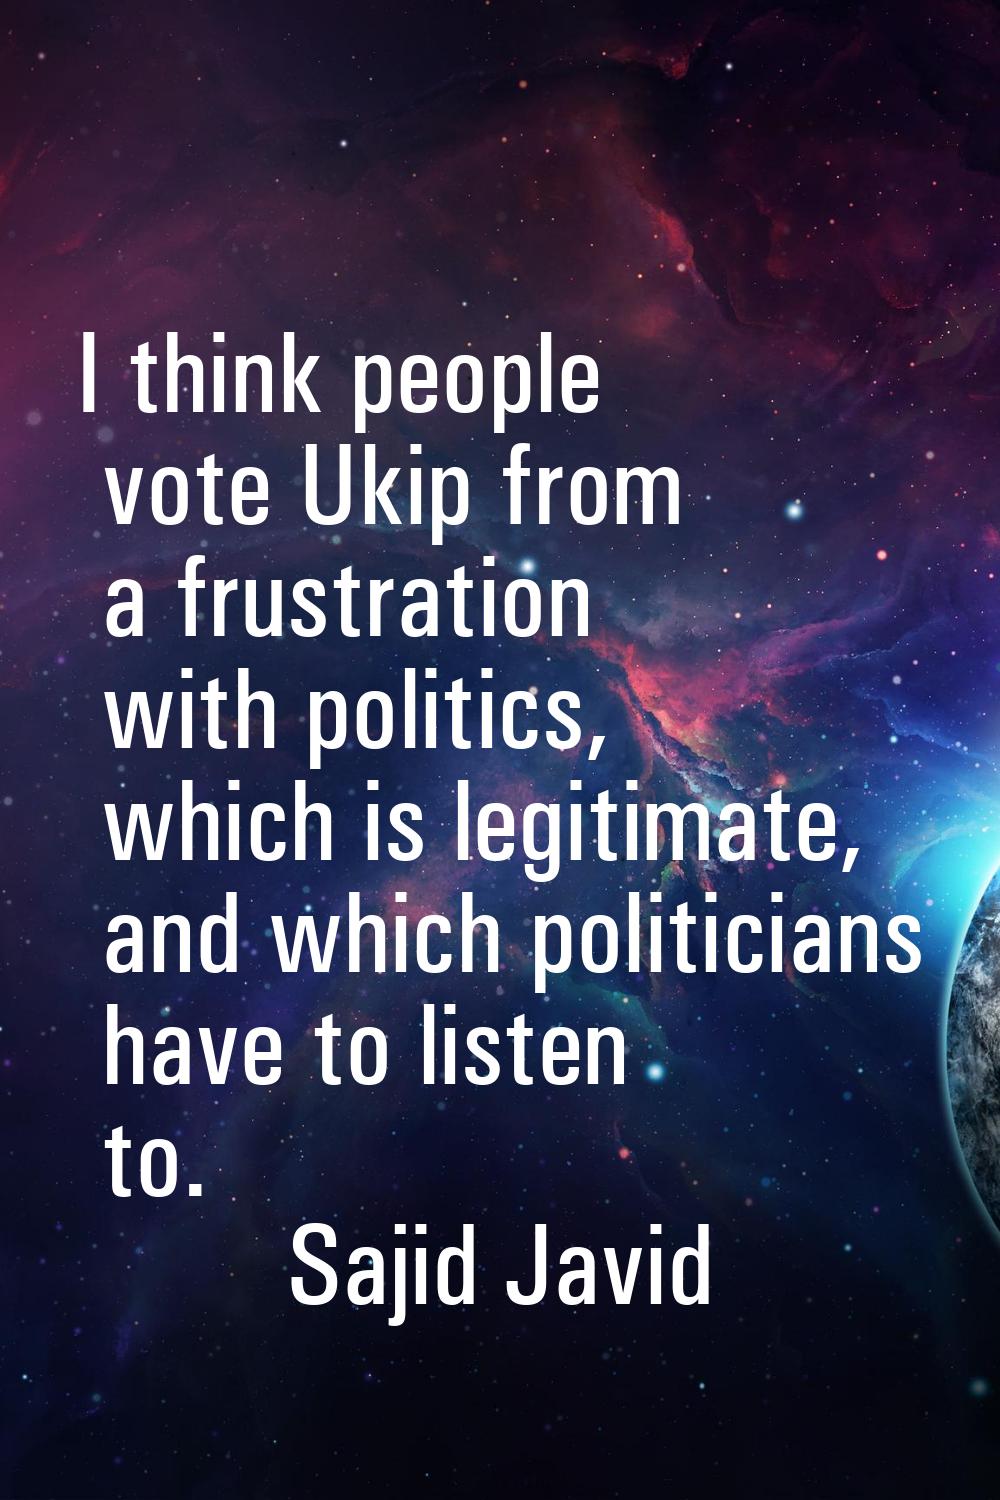 I think people vote Ukip from a frustration with politics, which is legitimate, and which politicia